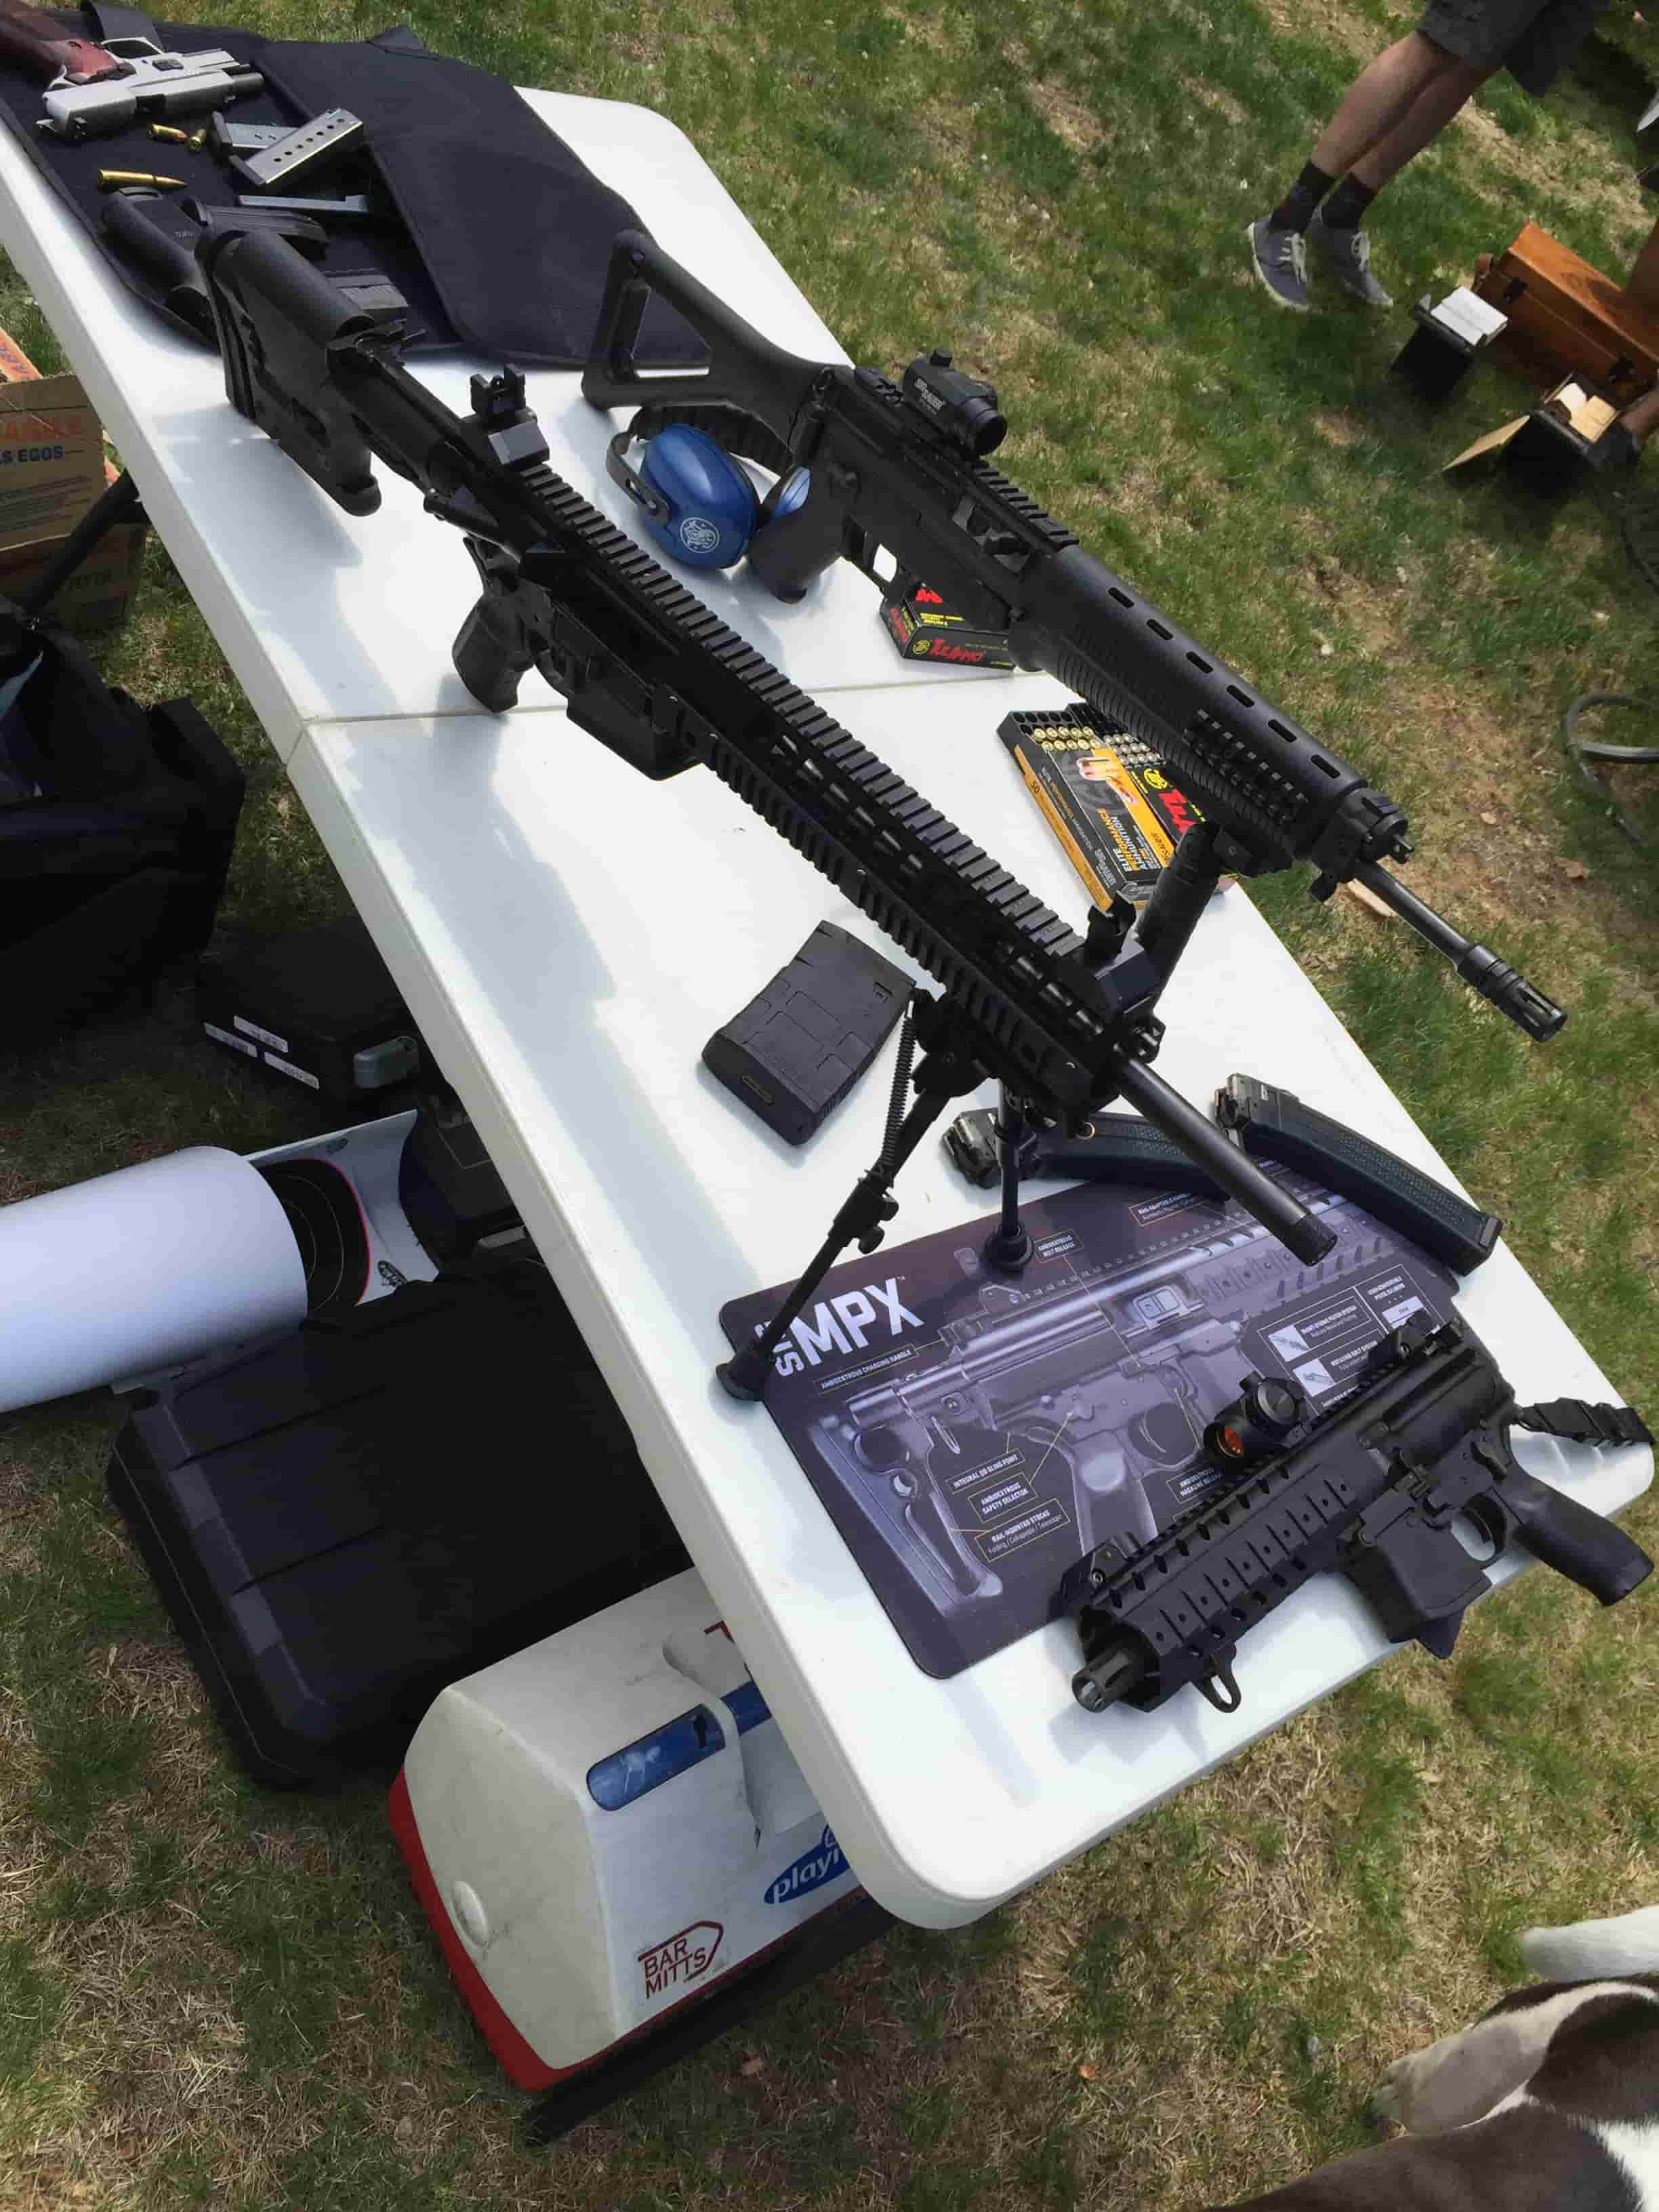 Distorted, downward view of a table with firearms on it